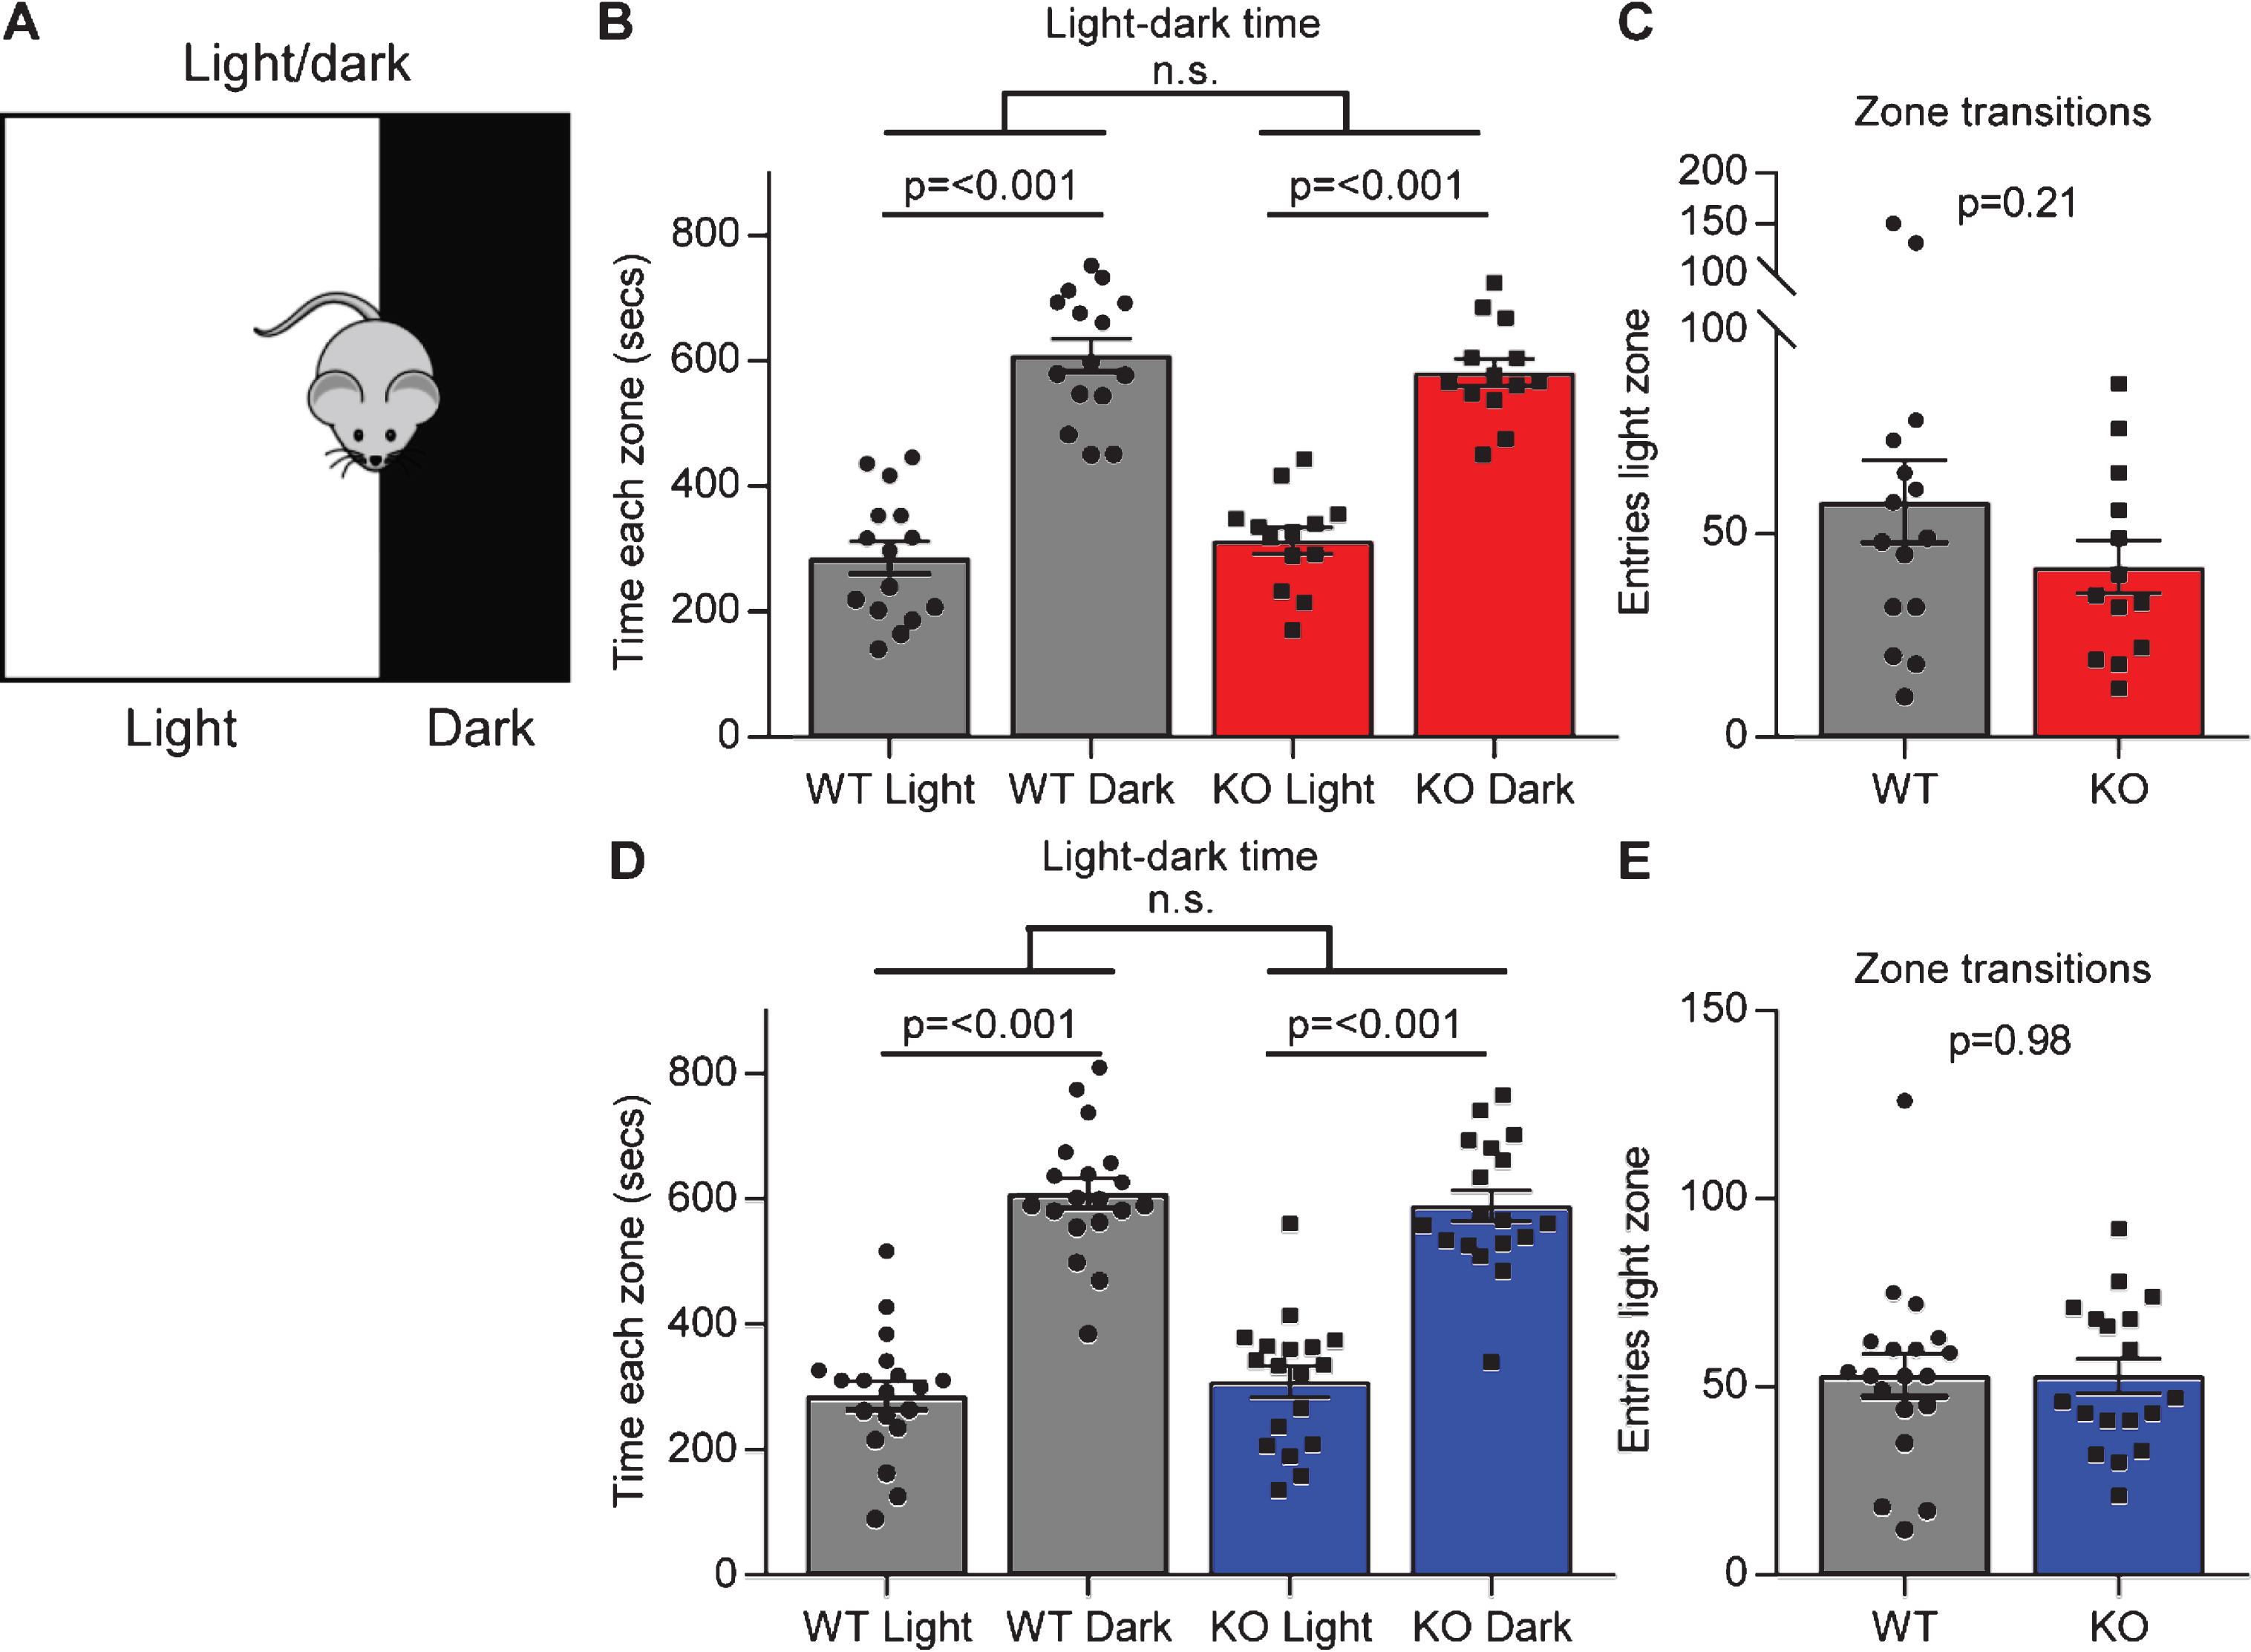 Gpc4 KO mice show no anxiety in the light-dark test. A. Schematic of the light-dark chamber used to test anxiety. B-C. Gpc4 KO and WT P90 mice on a C57Bl6/J background are indistinguishable from each other in time spent in the light or dark chamber over a 15 minute period (B) and in transitions between the dark and the light zone (C). N = 15 WT, 13 Gpc4 KO. D-E. Gpc4 KO and WT P90 mice on an FVB background are indistinguishable from each other in time spent in the light or dark chamber over a 15 minute period (D) and in transitions between the dark and the light zone (E). N = 19 WT, 18 Gpc4 KO. Statistics by 2-way ANOVA (B, D) or T-test (C, E), bar graph mean±s.e.m., individual points represent mice.